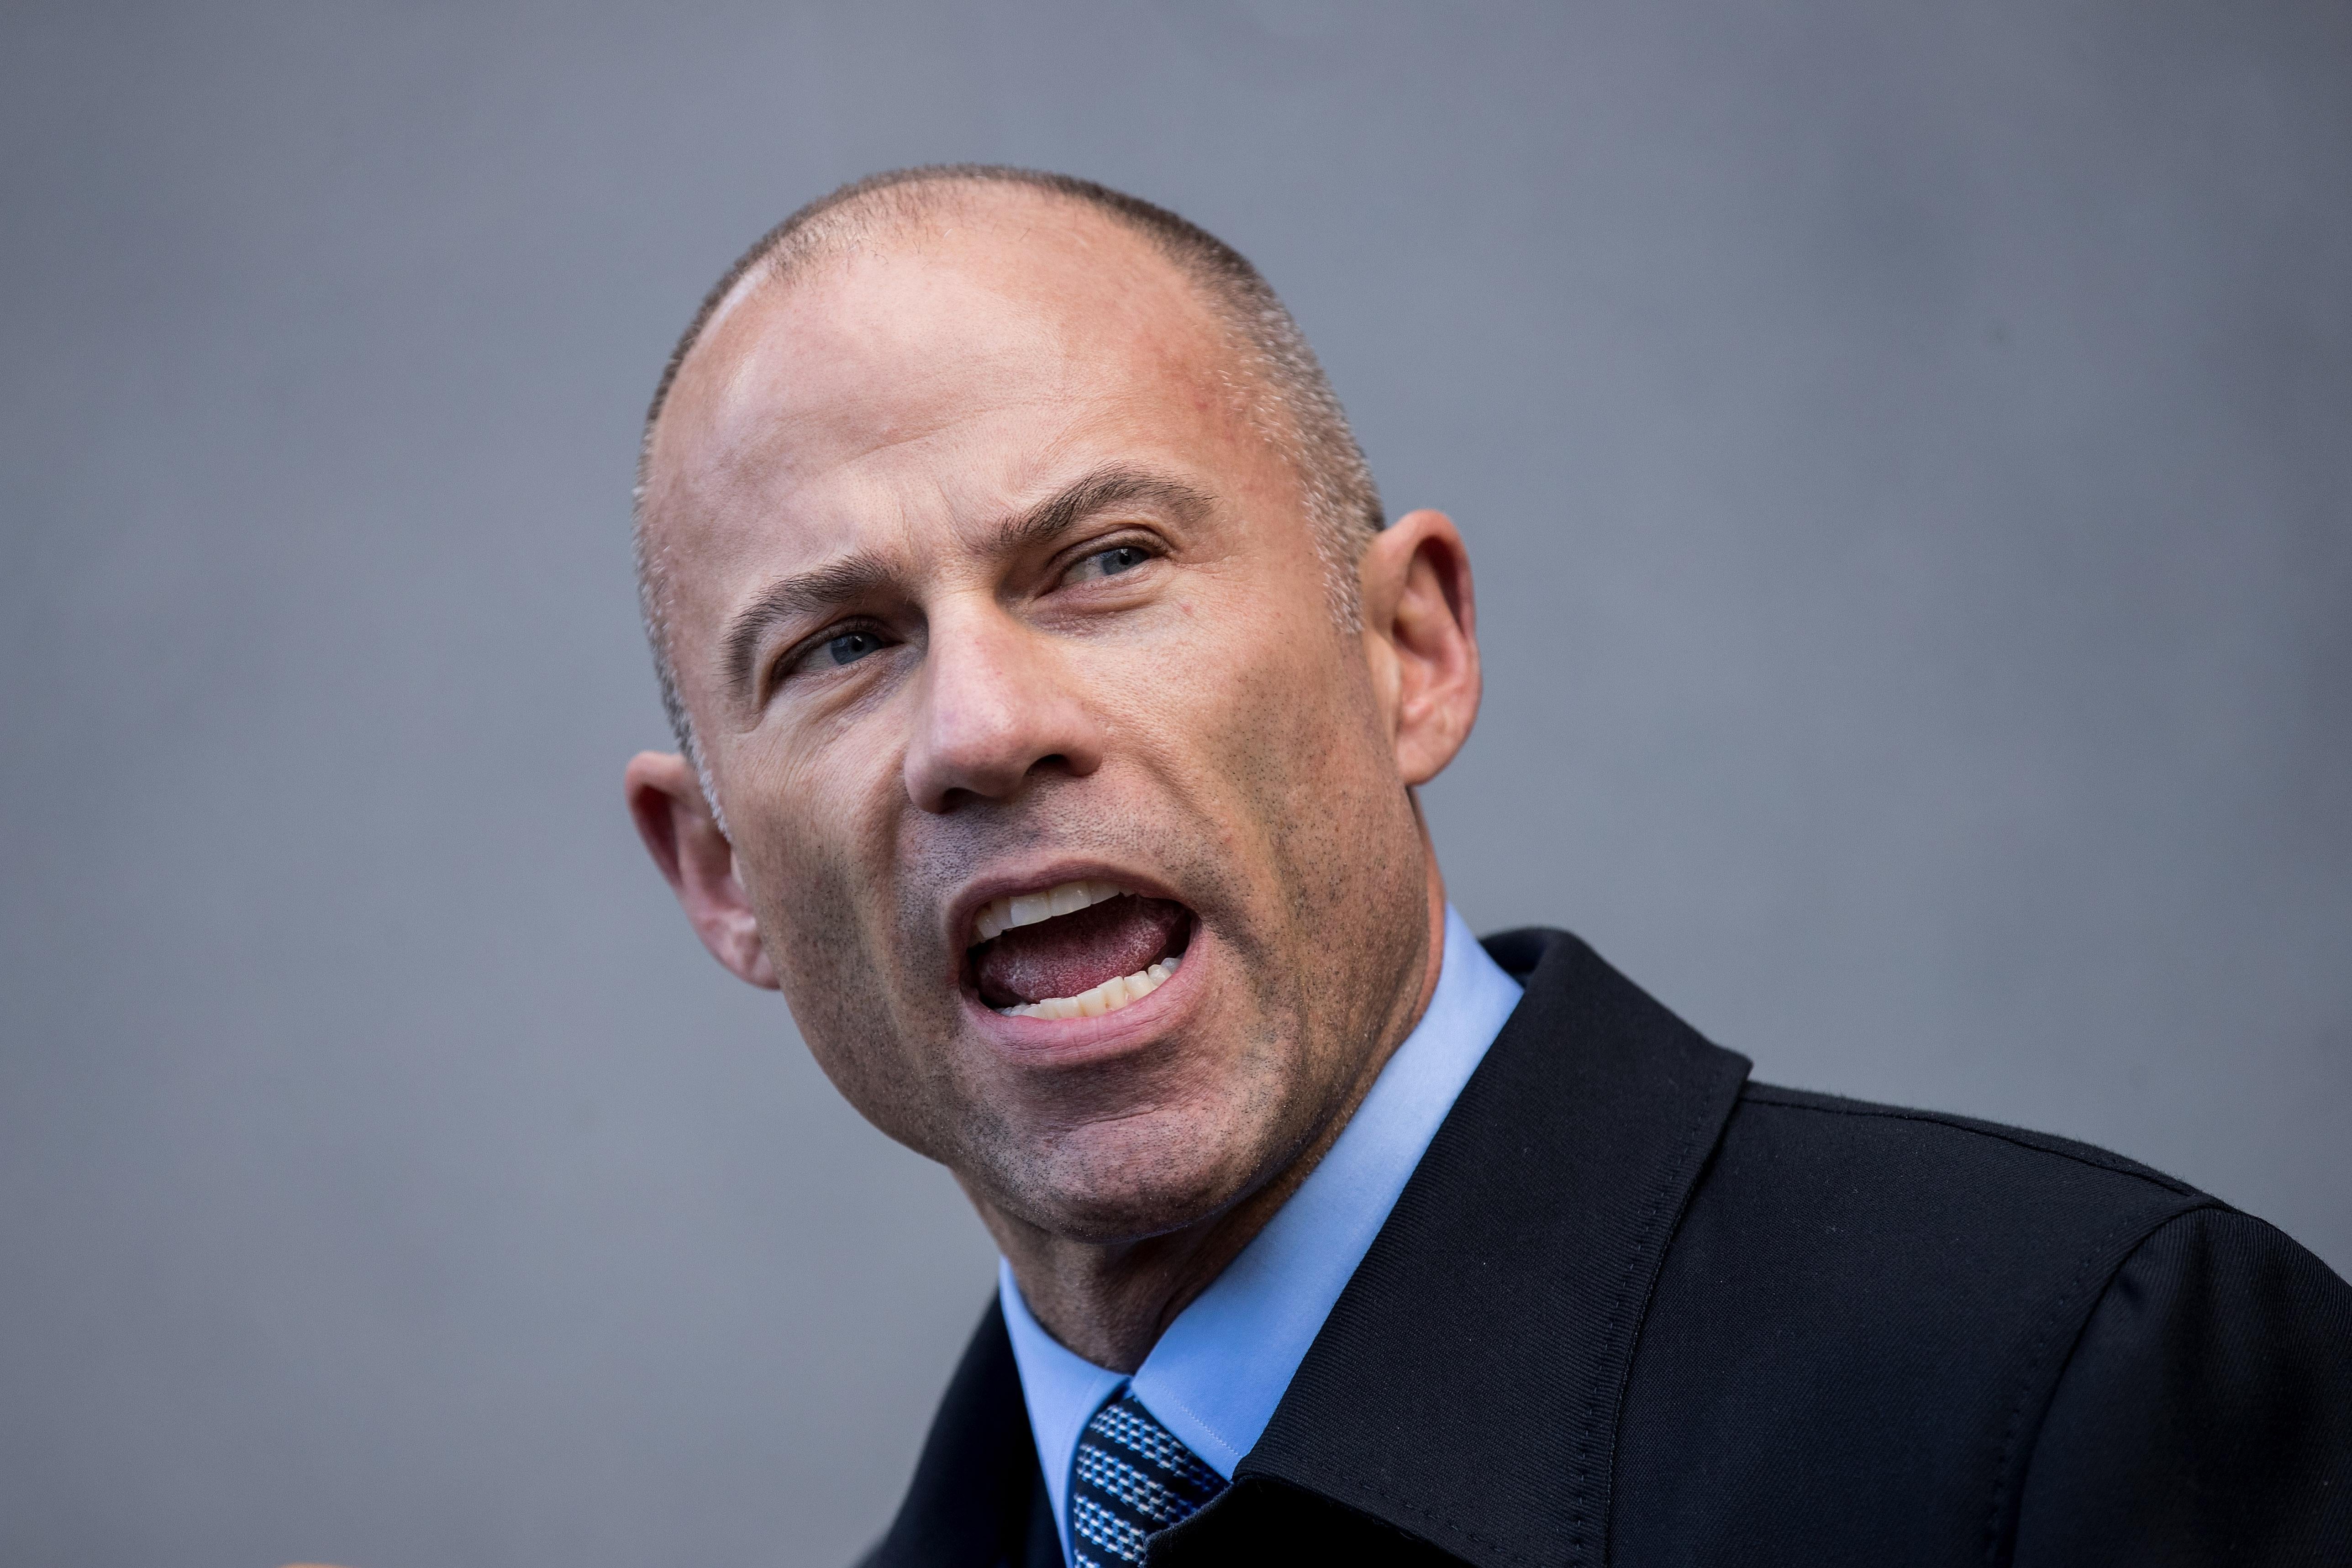 NEW YORK, NY - APRIL 16: Michael Avenatti, attorney for Stormy Daniels, speaks to reporters as he exits the United States District Court Southern District of New York for a hearing related to Michael Cohen, President Trump's longtime personal attorney and confidante, April 16, 2018 in New York City.  Cohen and lawyers representing President Trump are asking the court to block Justice Department officials from reading documents and materials related to Cohen's relationship with President Trump that they believe should be protected by attorney-client privilege. Officials with the FBI, armed with a search warrant, raided Cohen's office and two private residences last week.  (Photo by Drew Angerer/Getty Images)